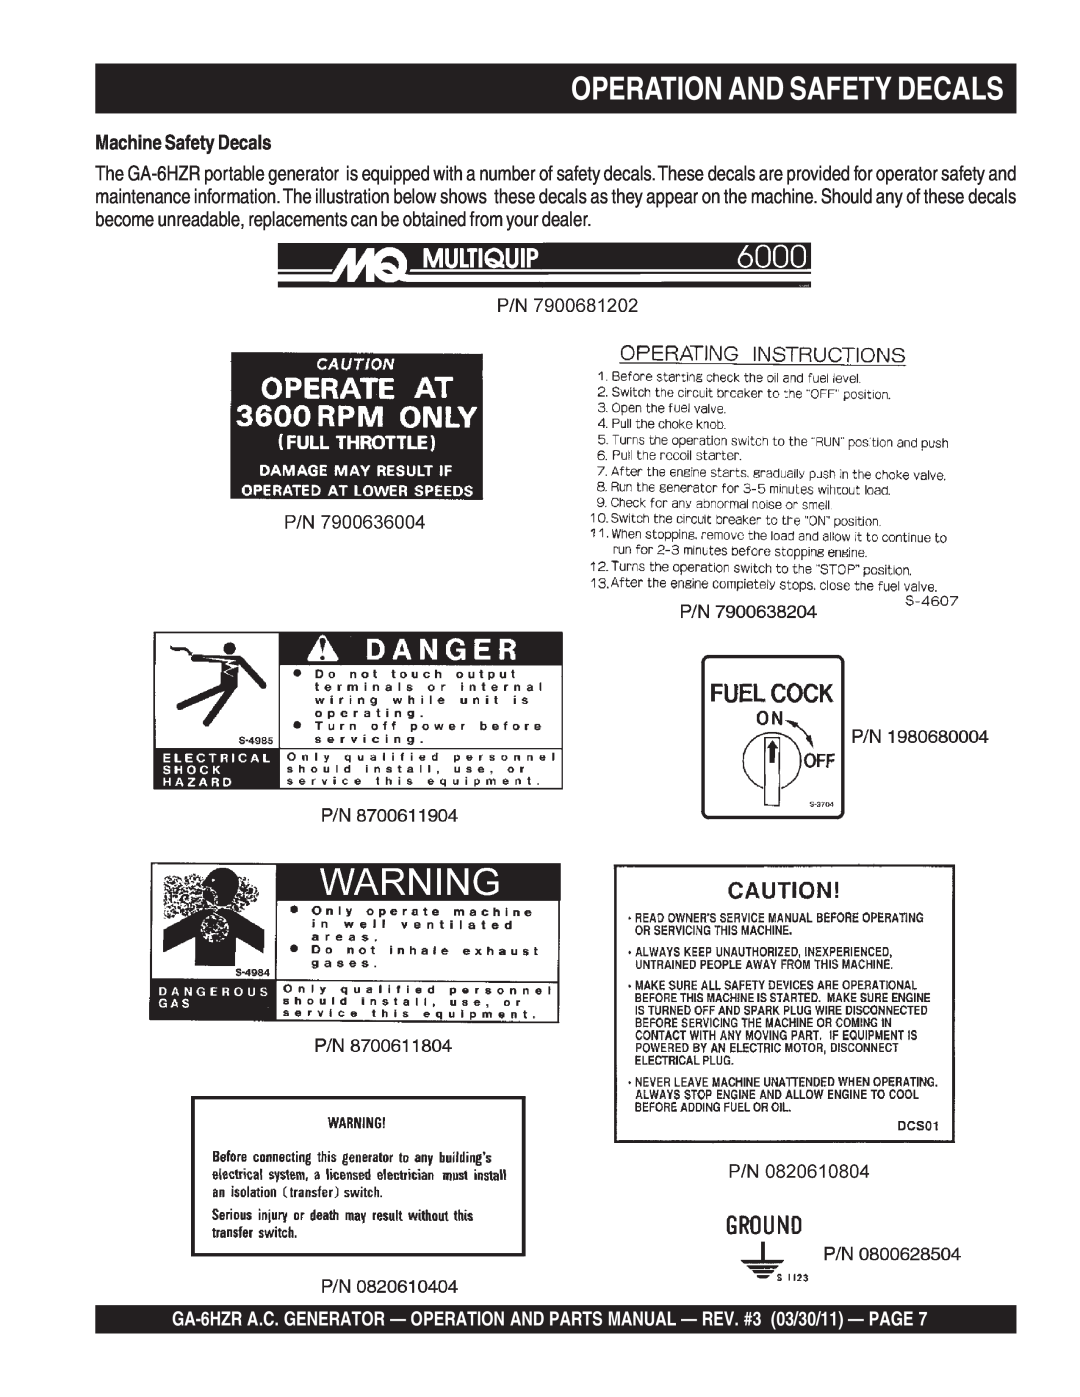 Multiquip GA6HZR manual Operation And Safety Decals, Machine Safety Decals 